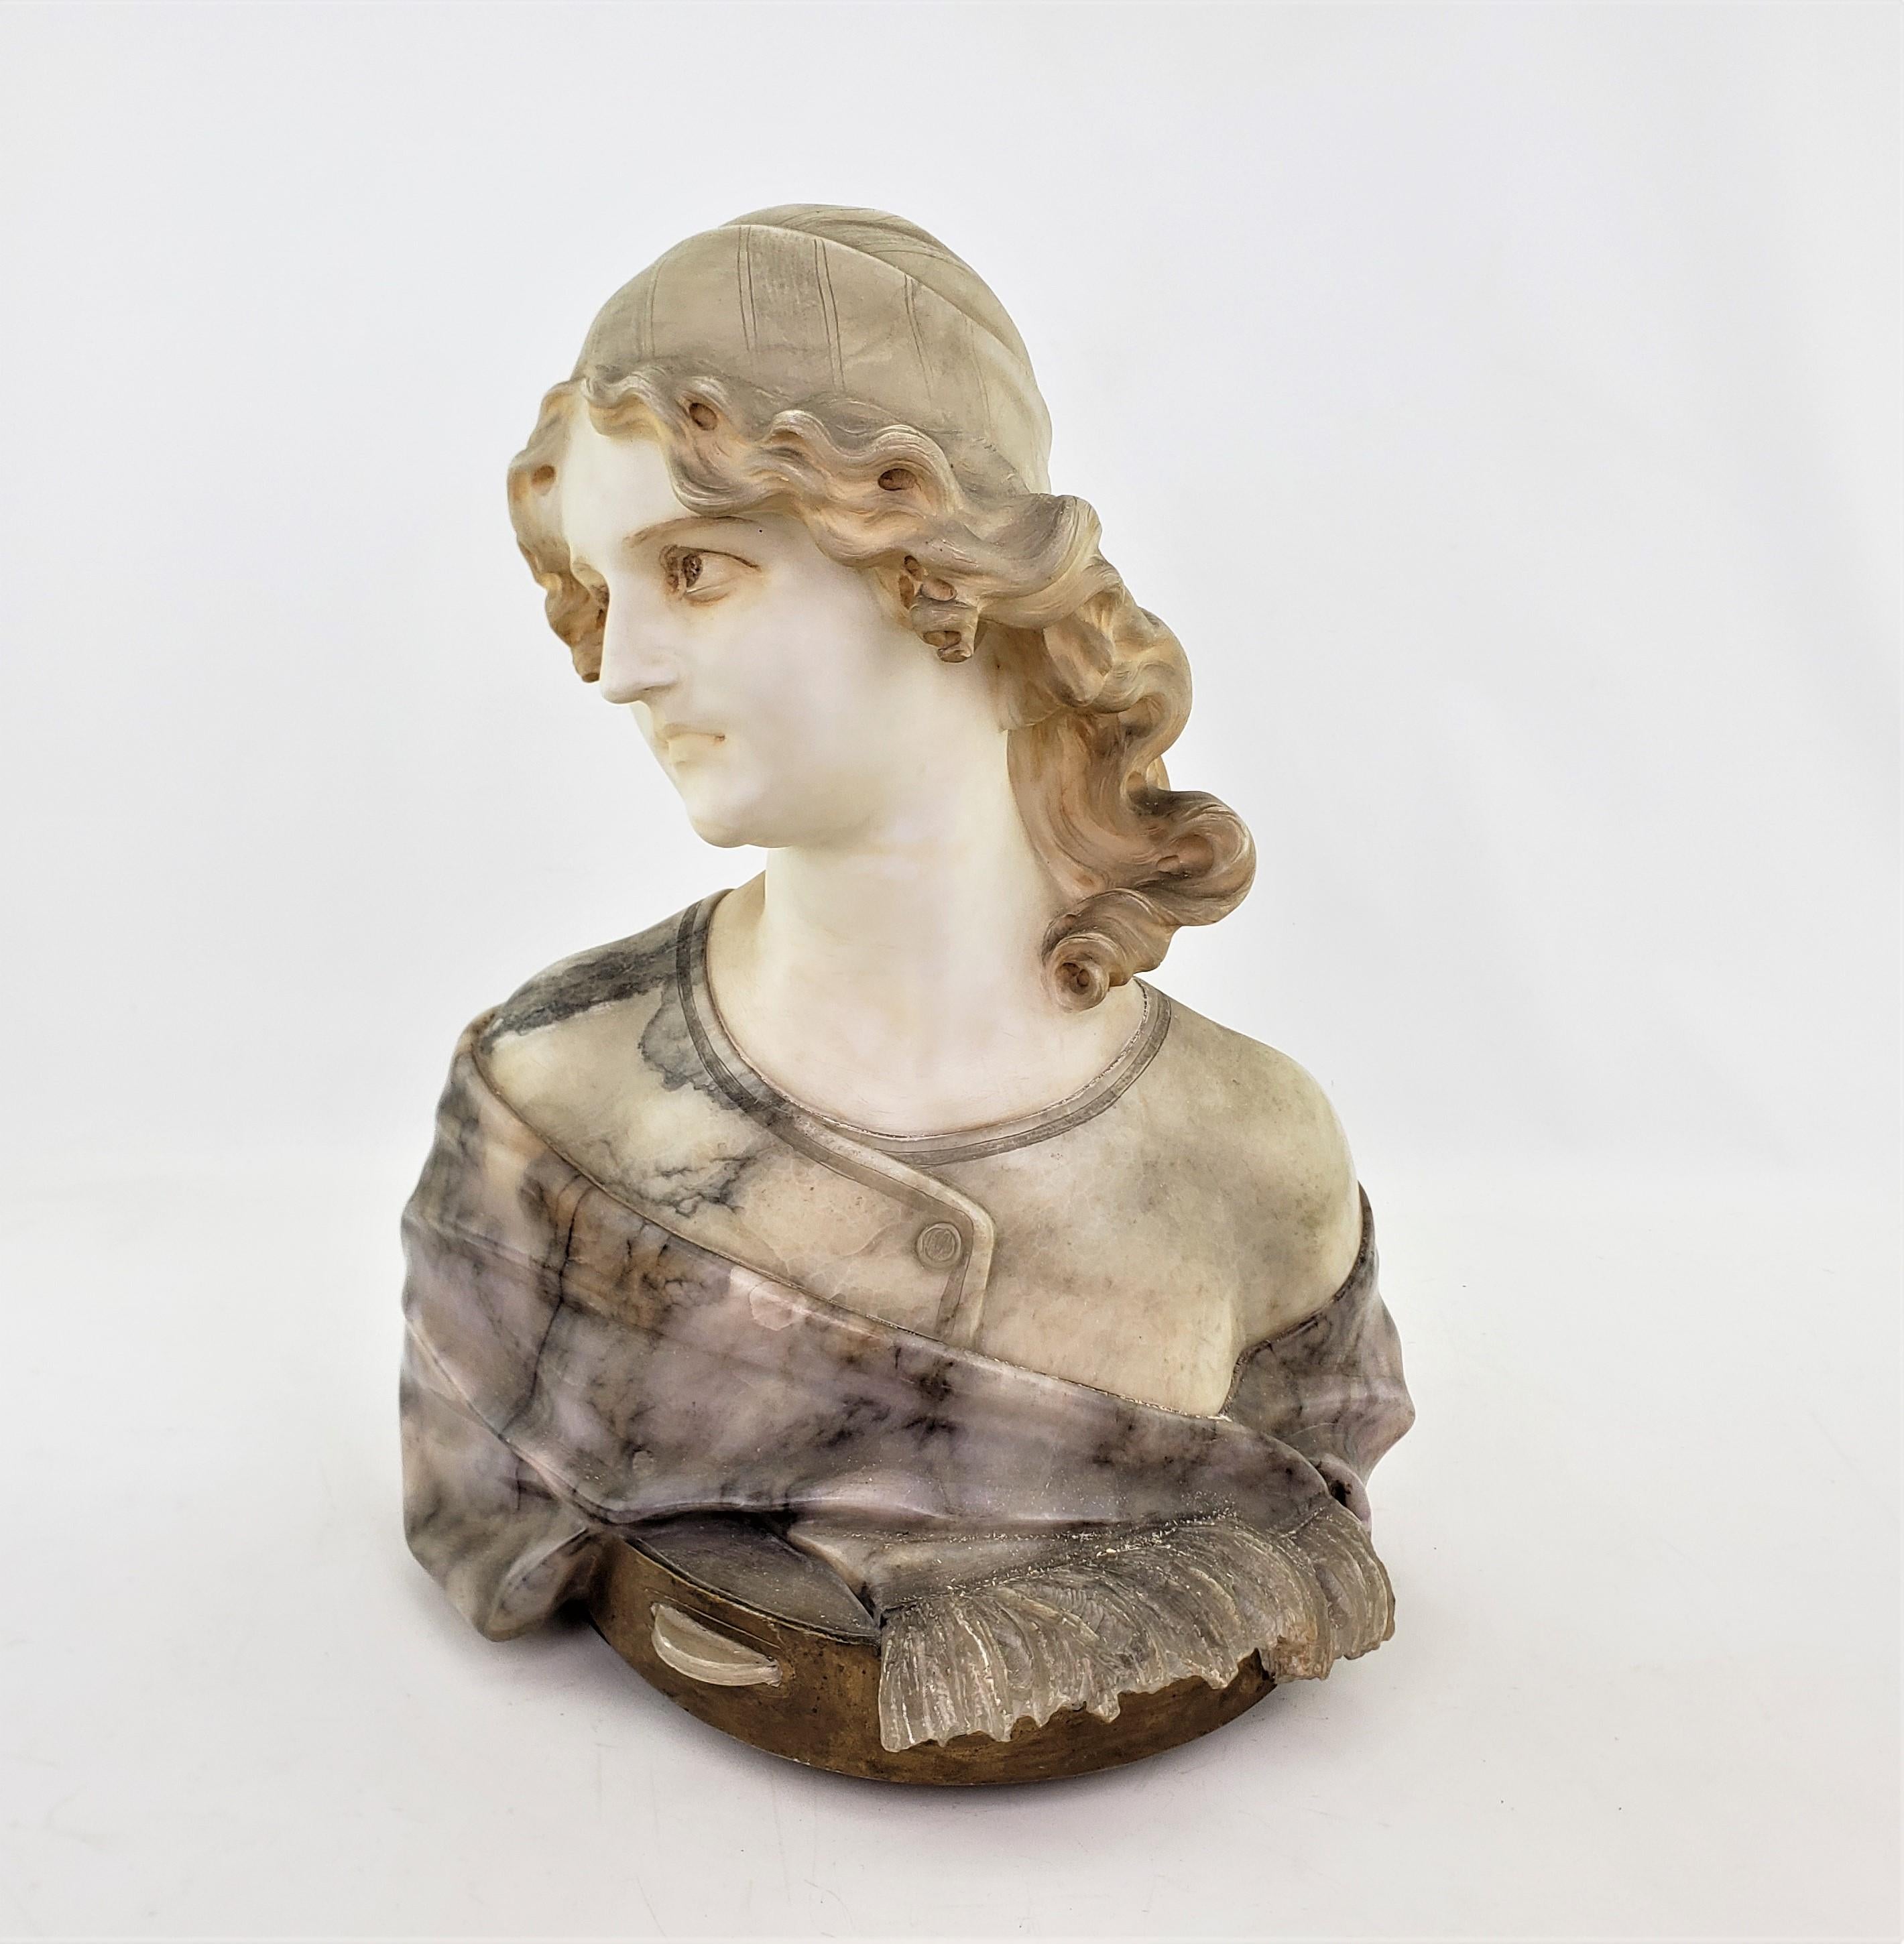 This large, substantial and very well executed bust is signed by an unknown artist, and presumed to have originated from Italy and date to approximately 1900 and done in a period Victorial realistic style. The sculpture is done in marble and depicts